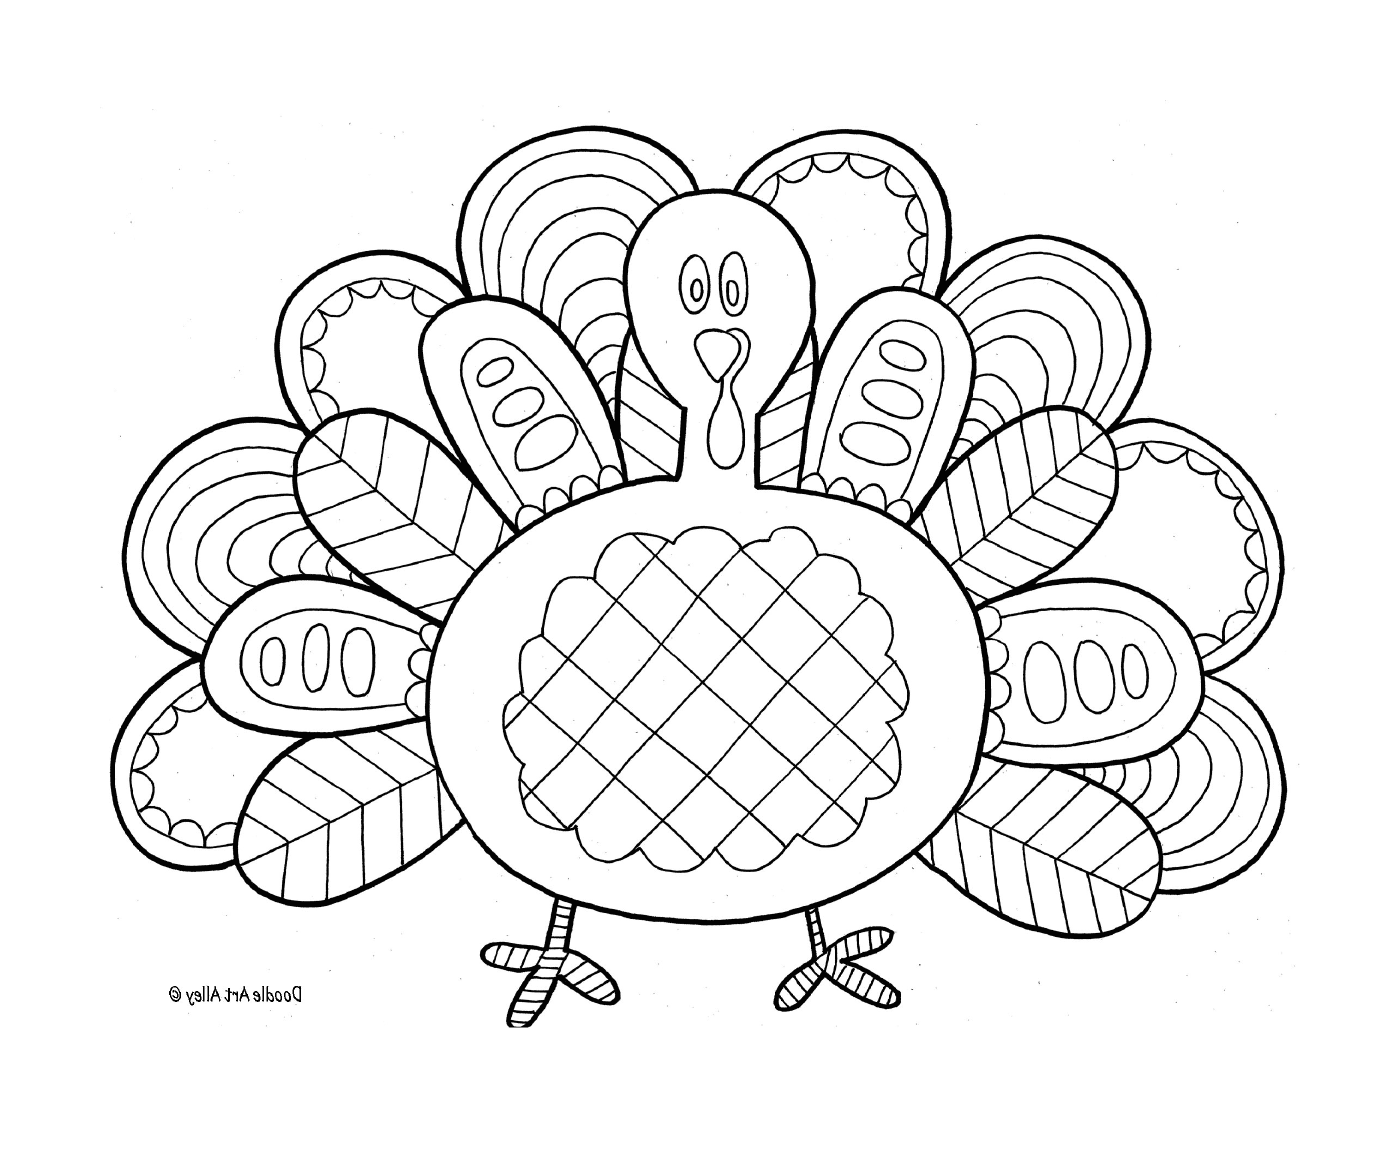  A turkey drawn in black and white 